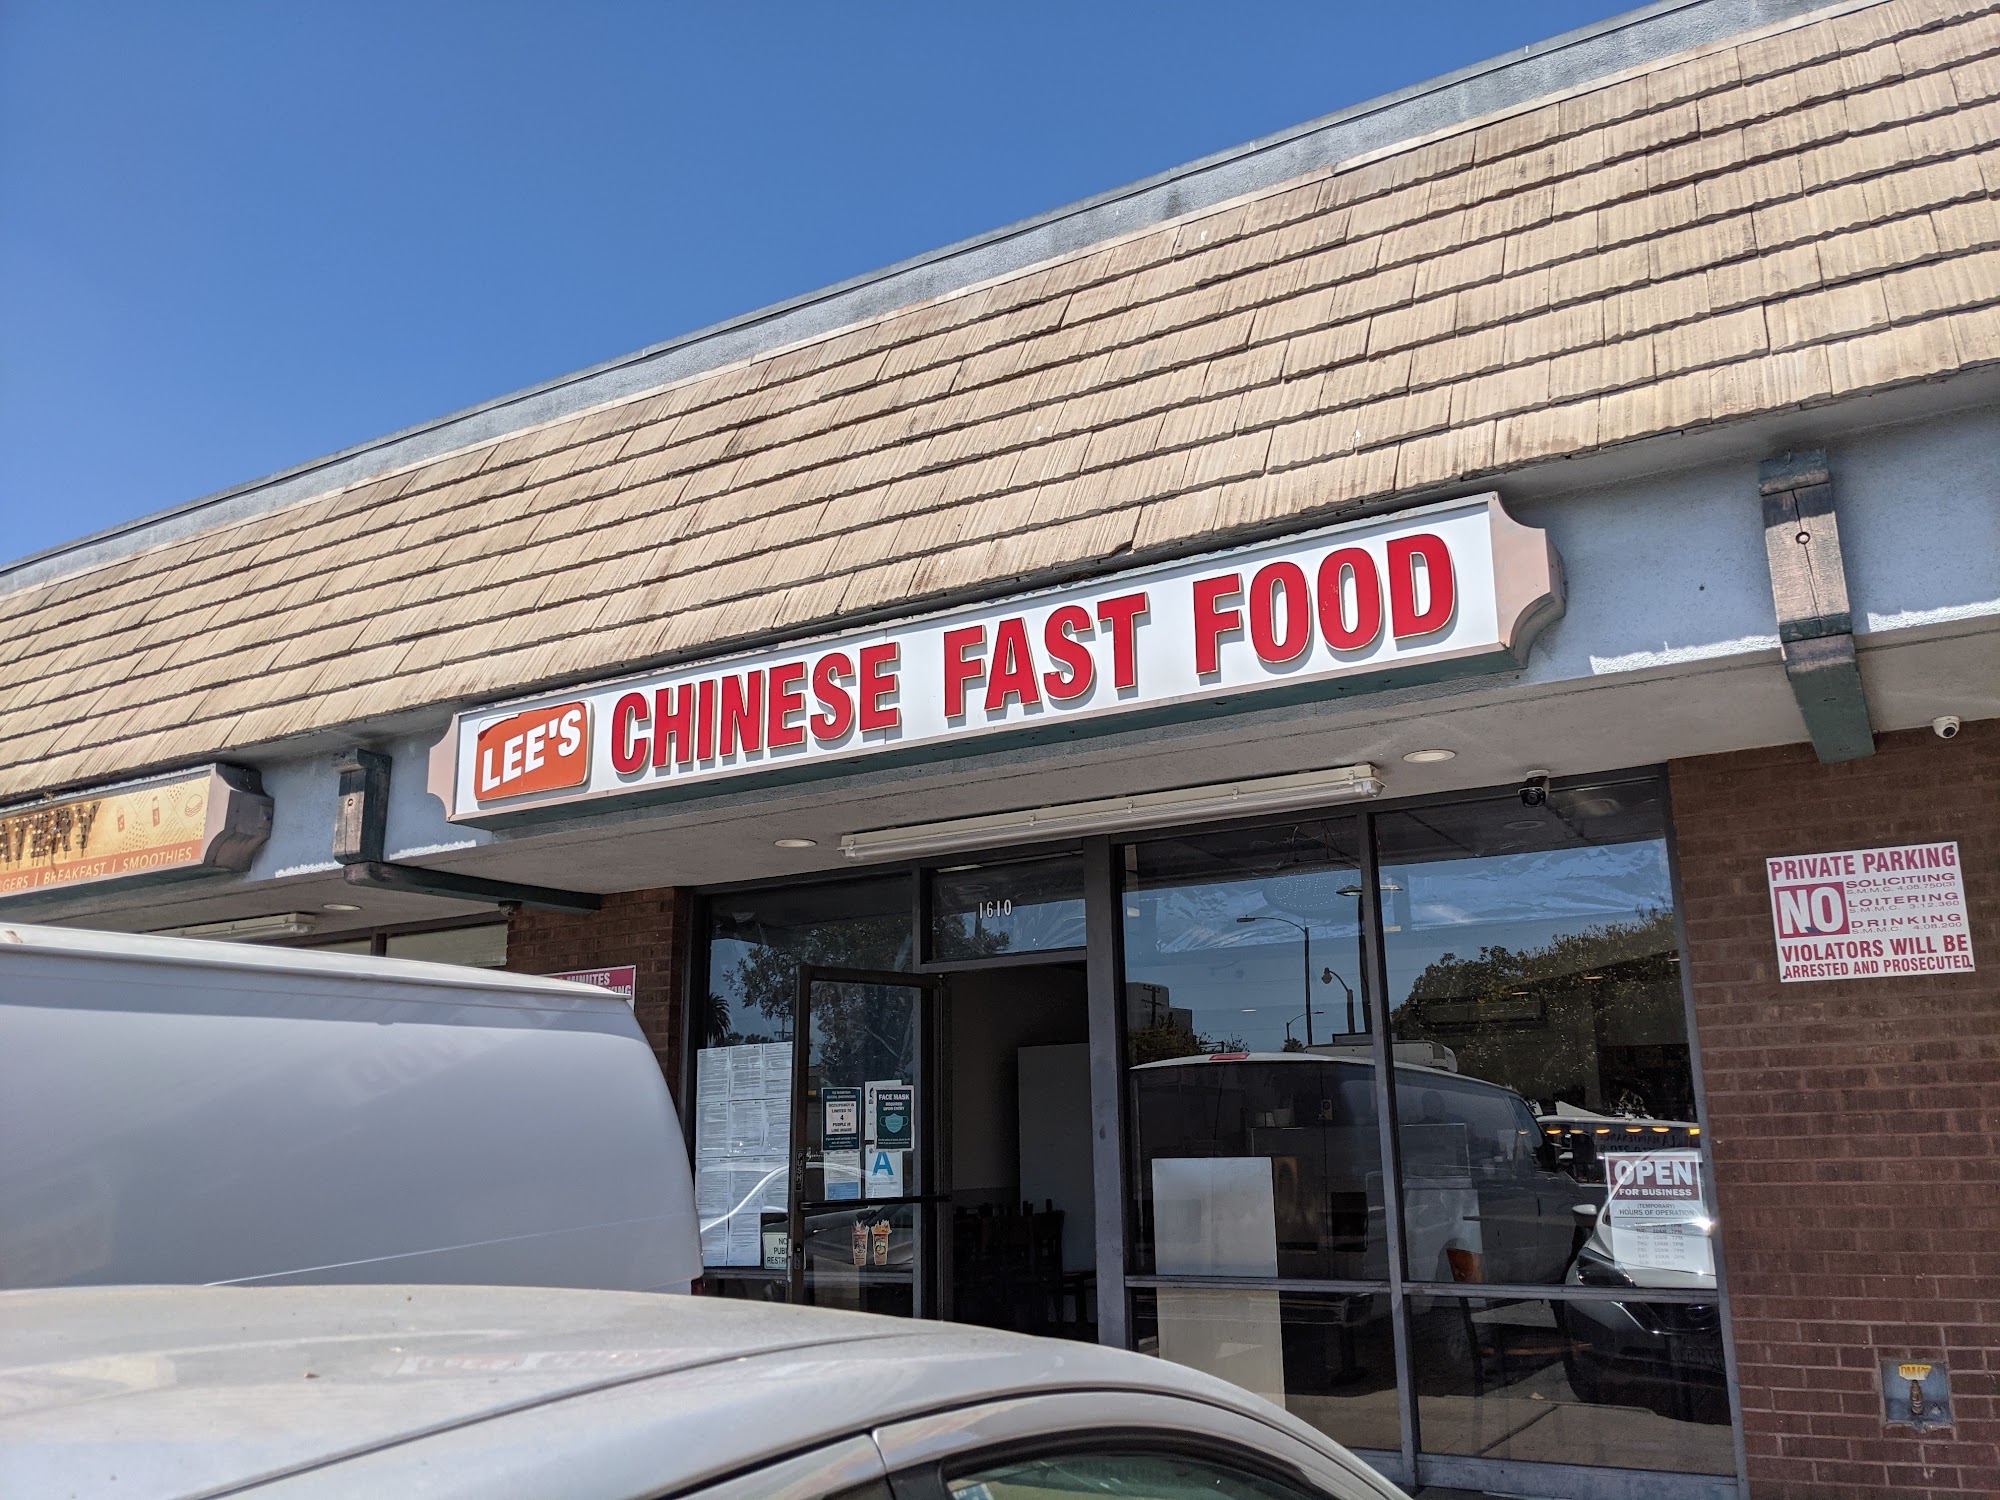 Lee's Chinese Fast Food